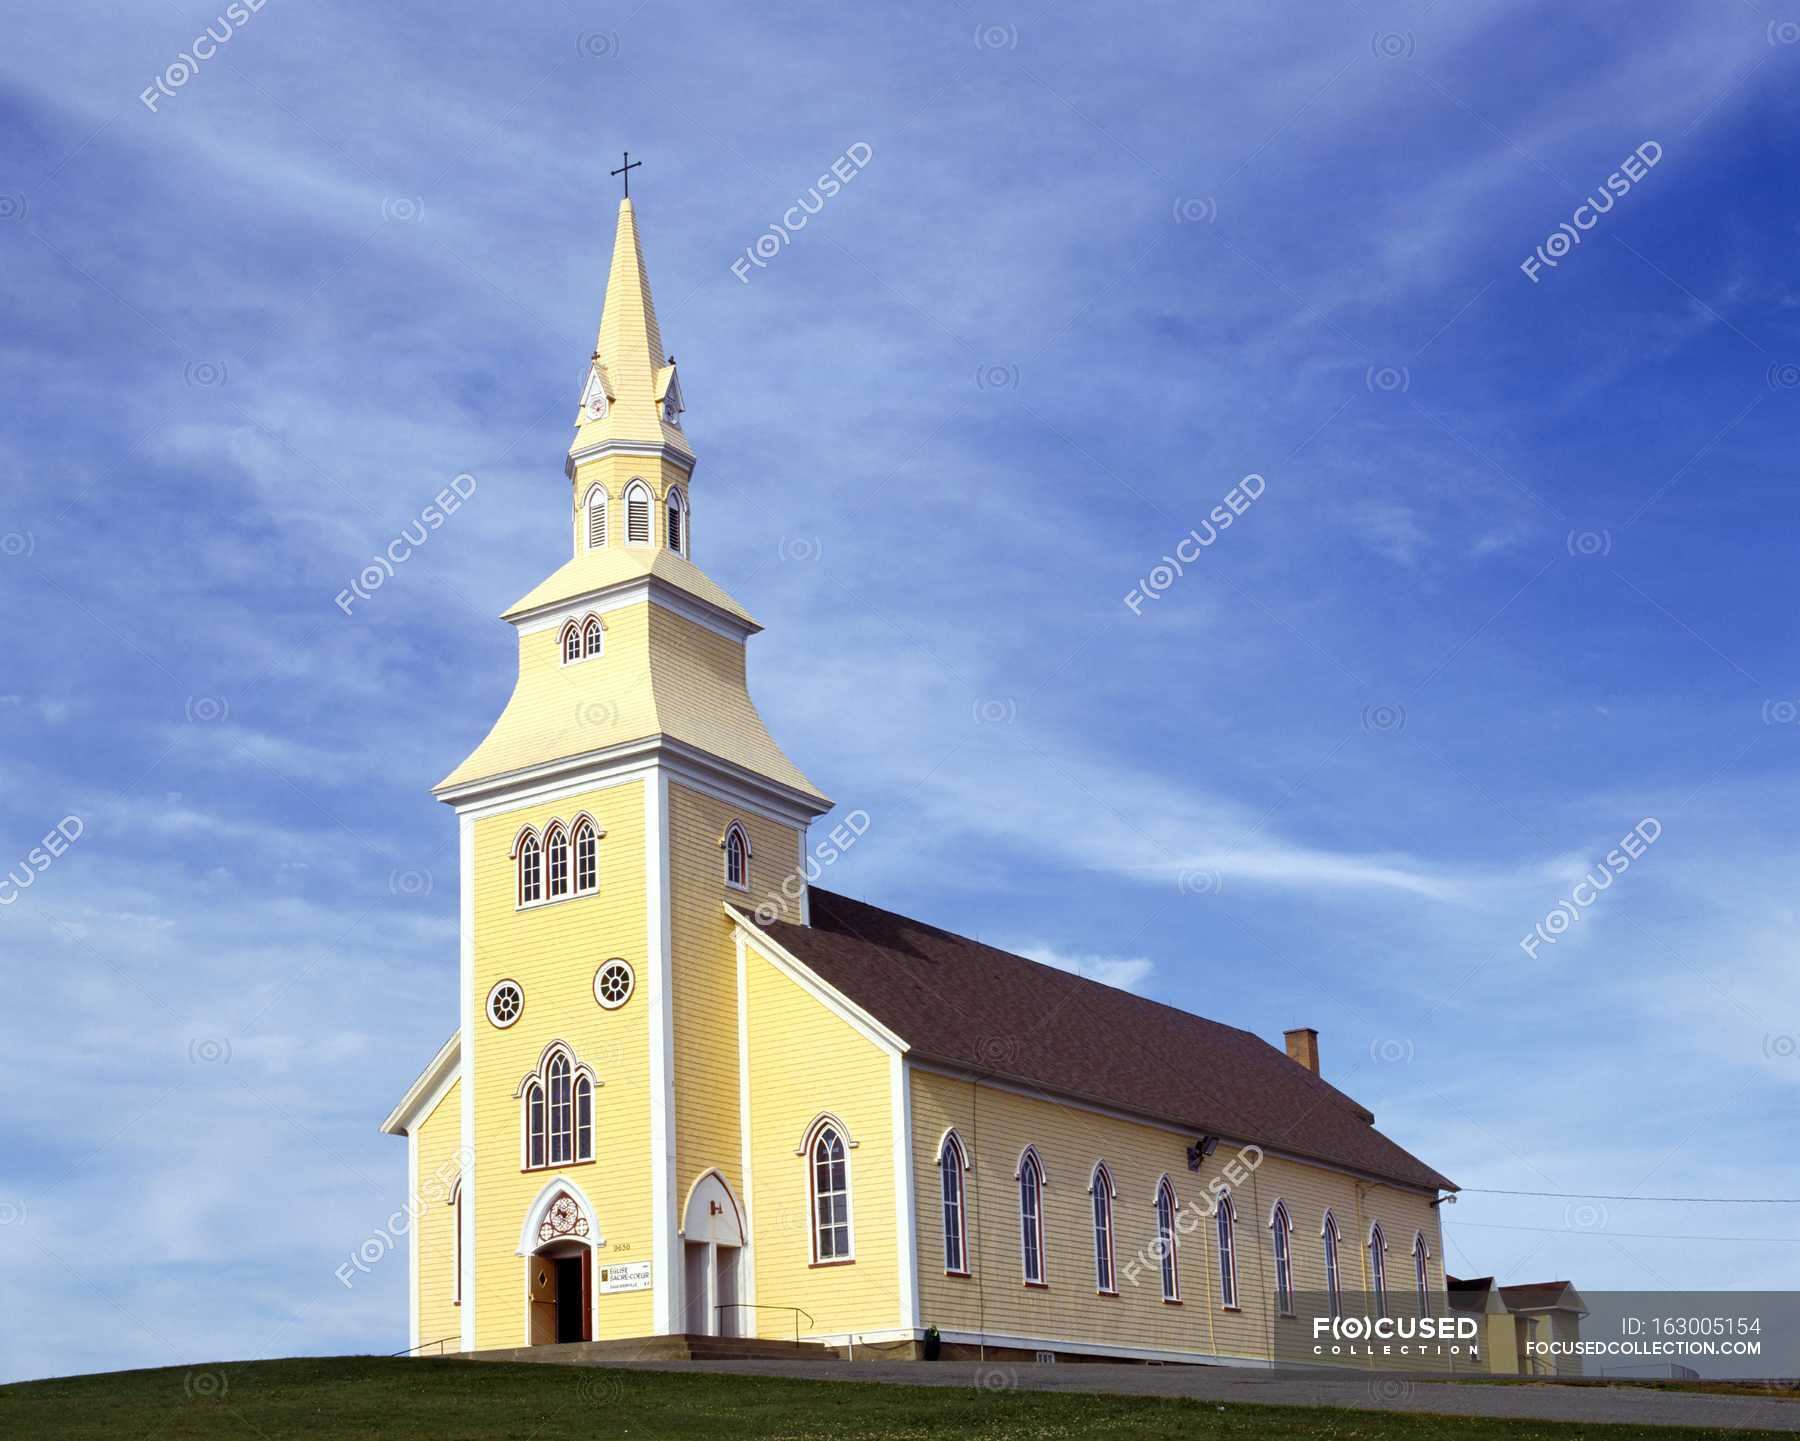 Yellow Church With Steeple — Stock Photo | #163005154